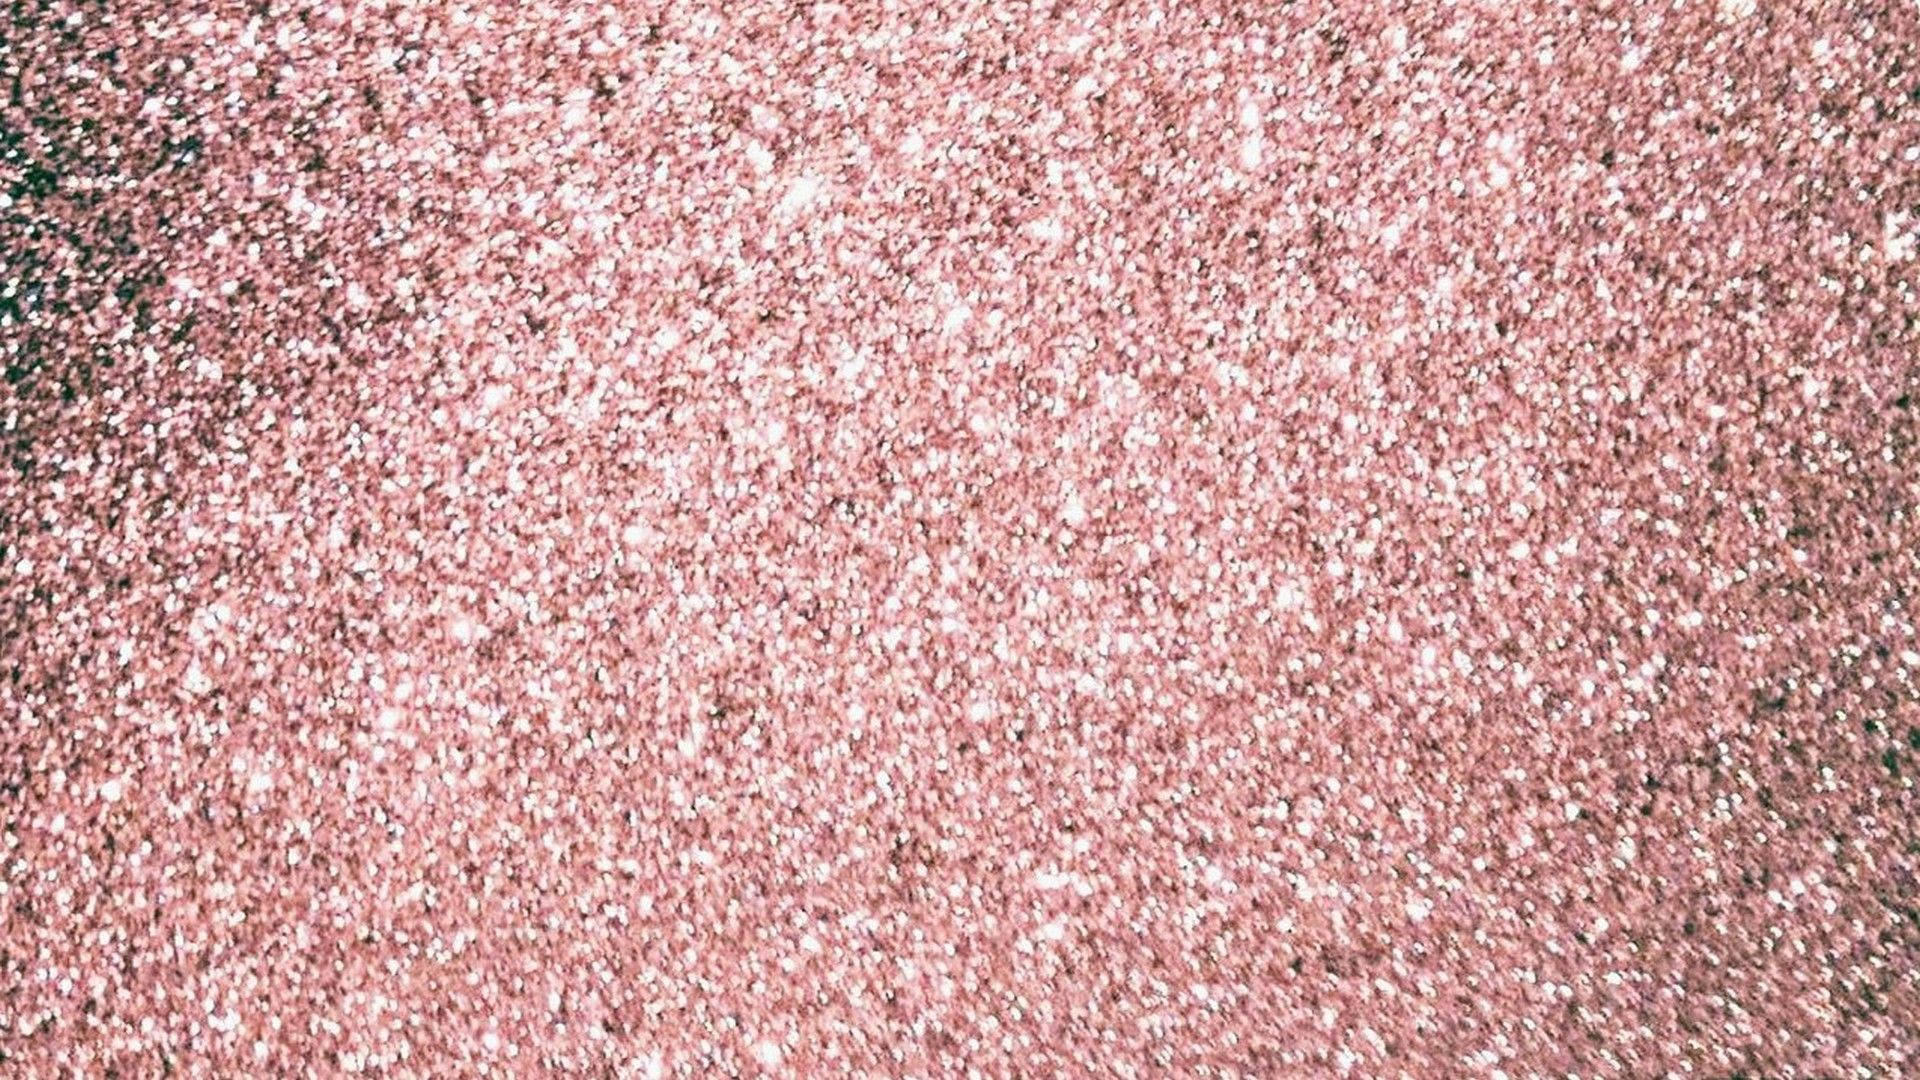 Sparkly Blush Pink Surface Wallpaper